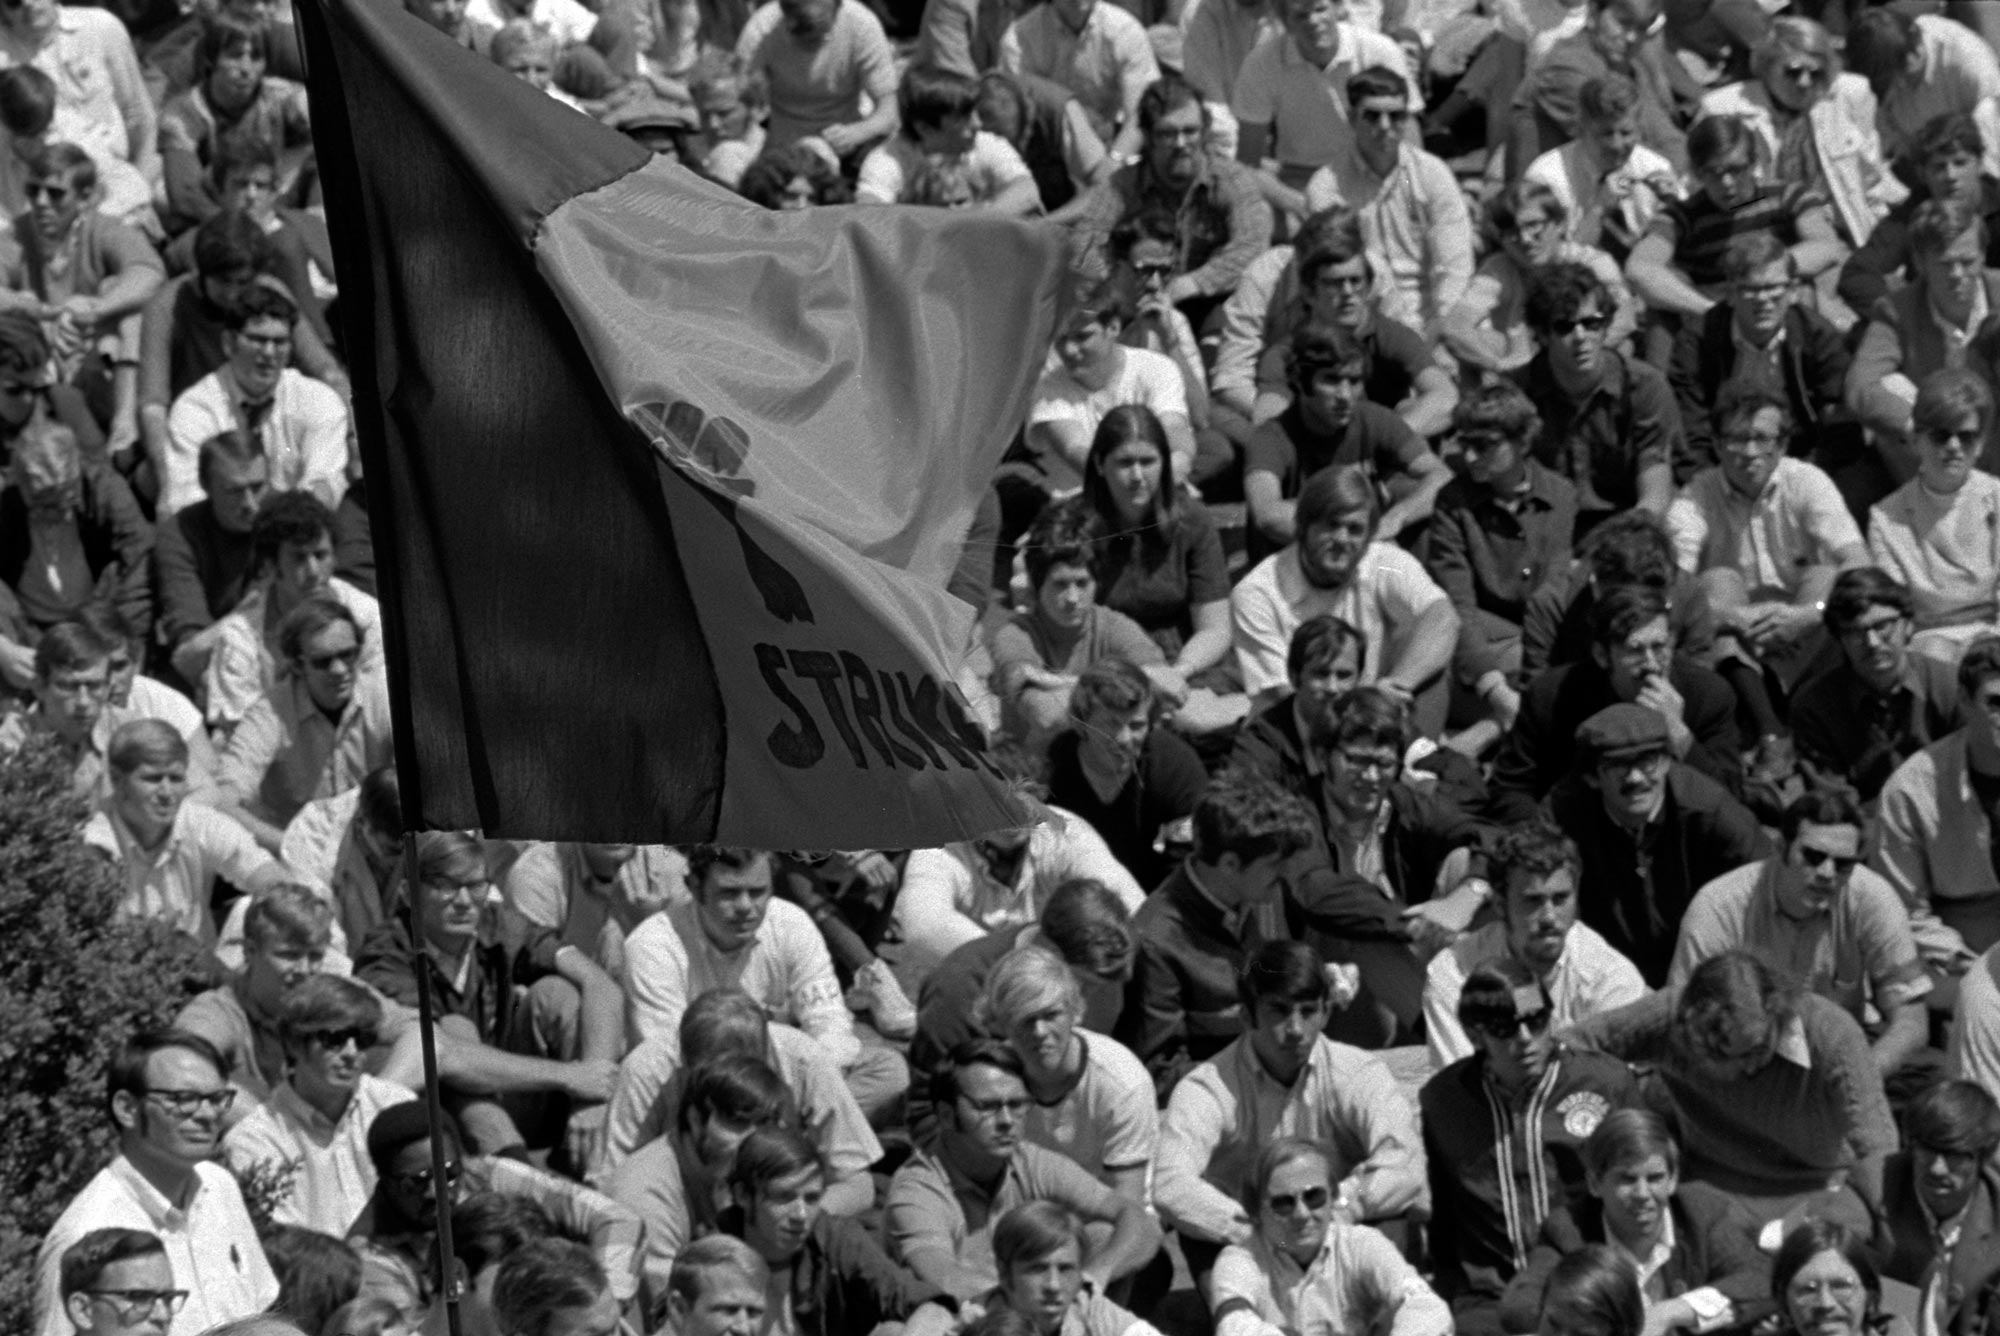 Black and White image of men sitting on the ground waving a two colored flag, but unable to know the colors or see the words on the flag